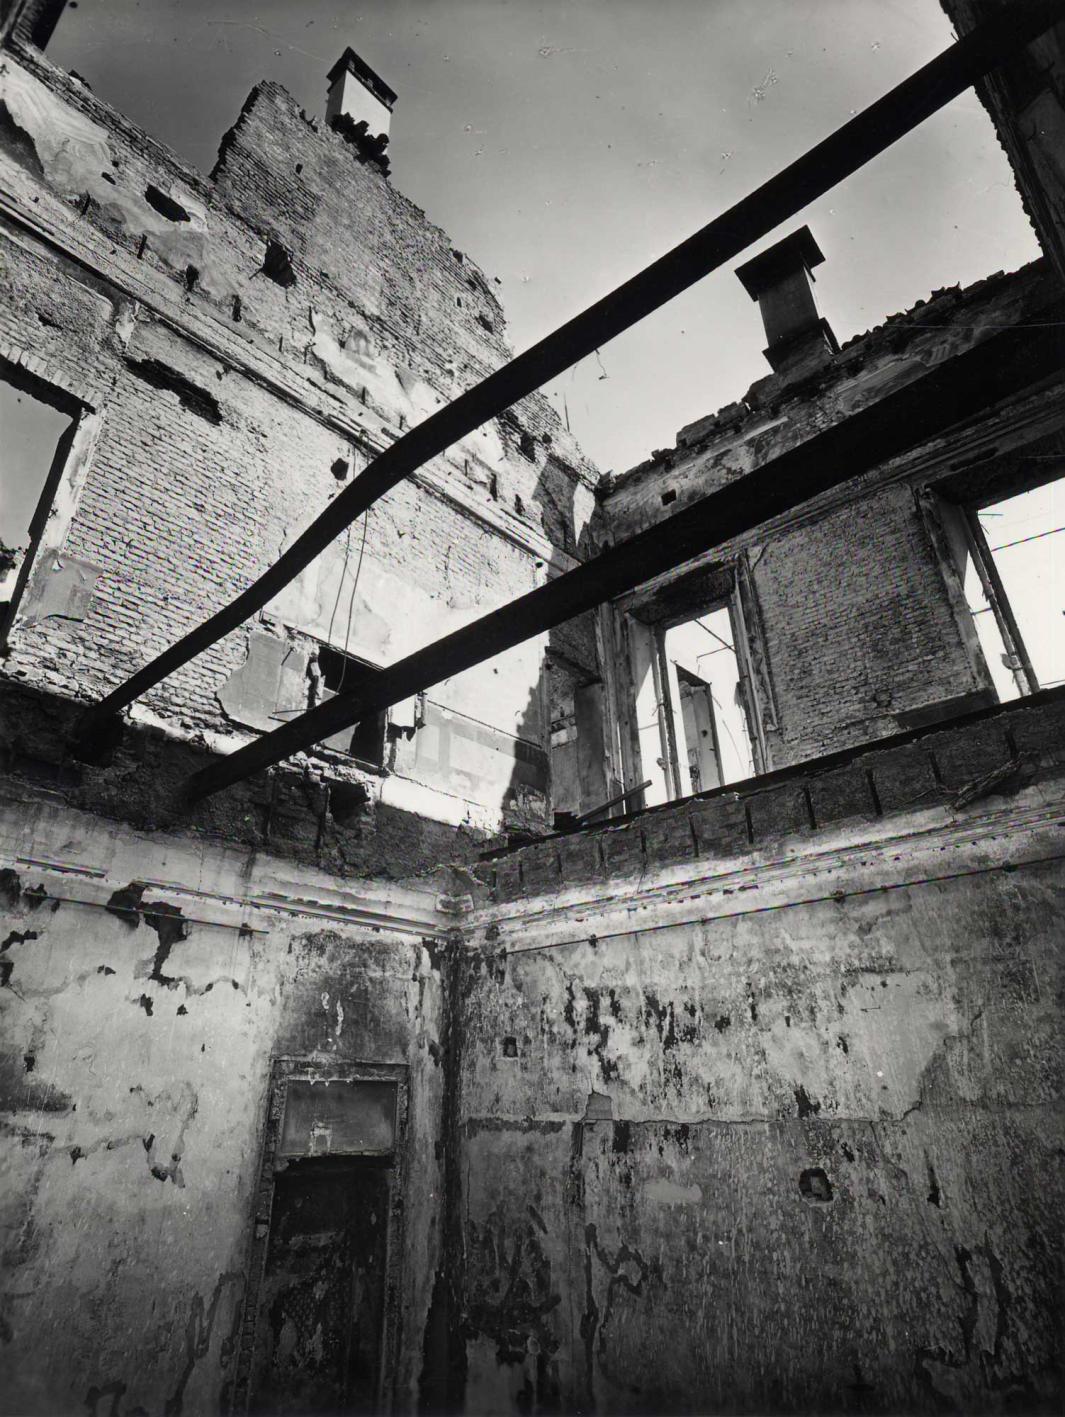 Photograph of the interior of a damaged building.